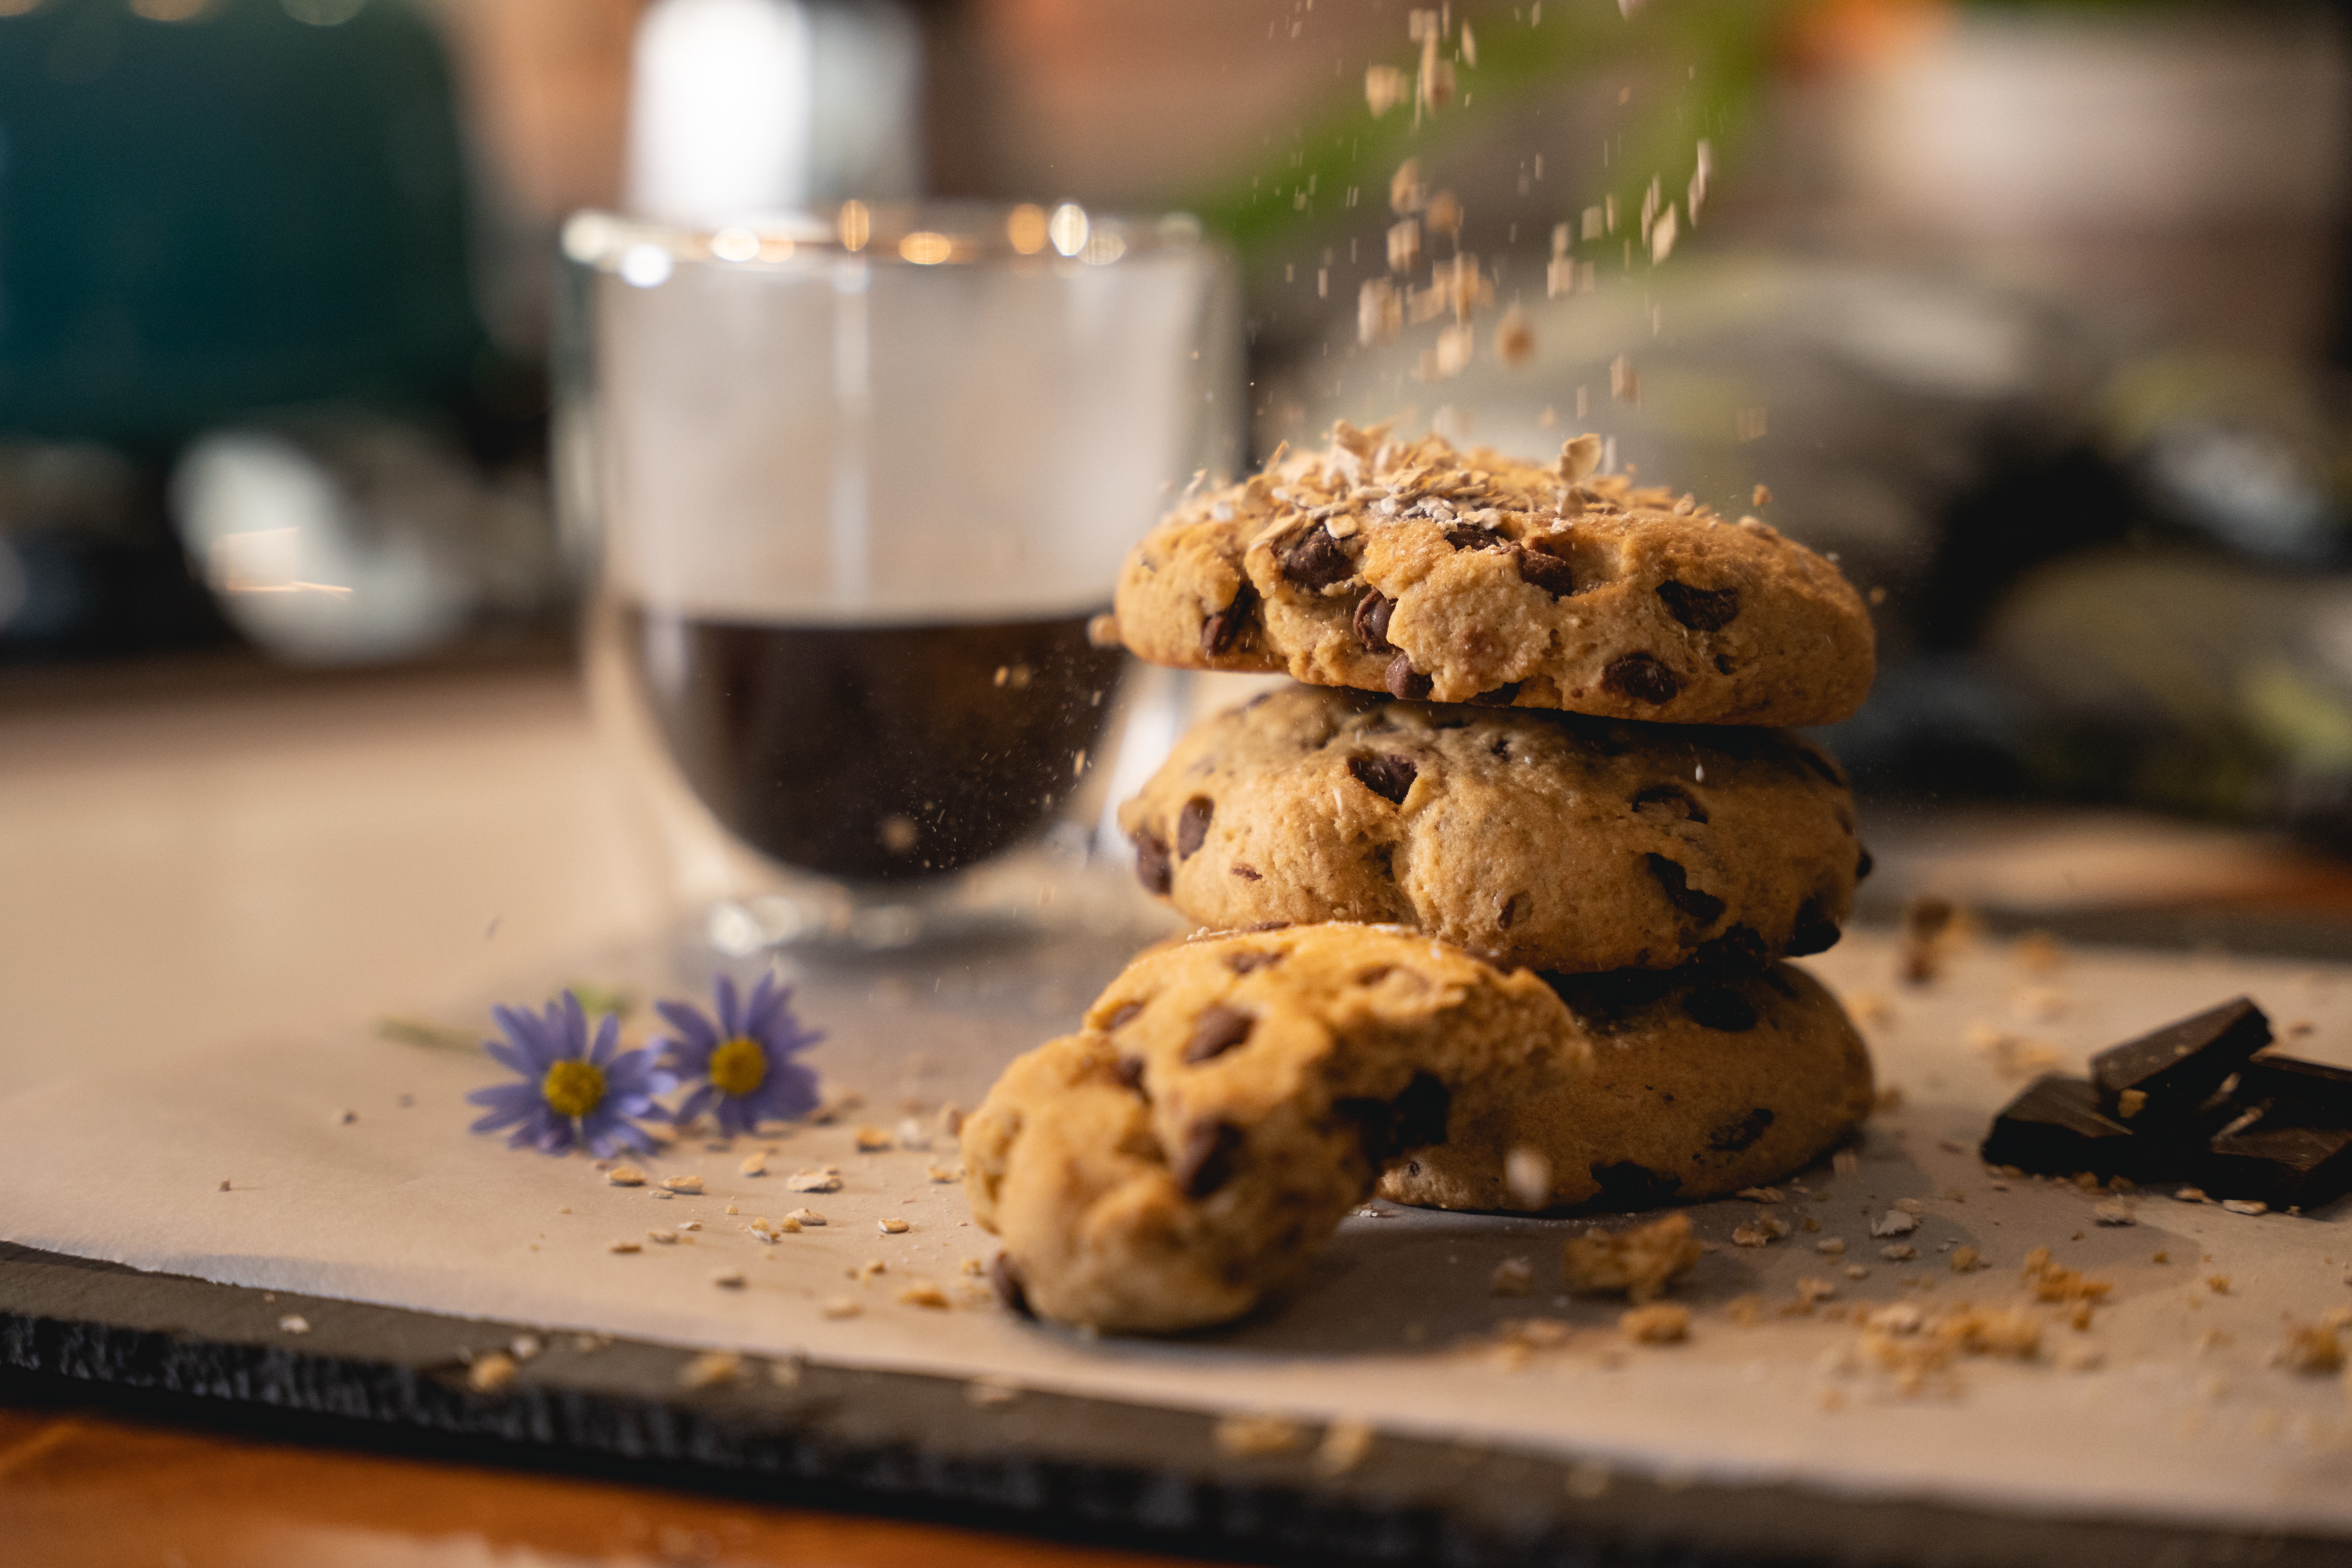 Chocolate chip cookies sit on a table next to a cup of coffee.